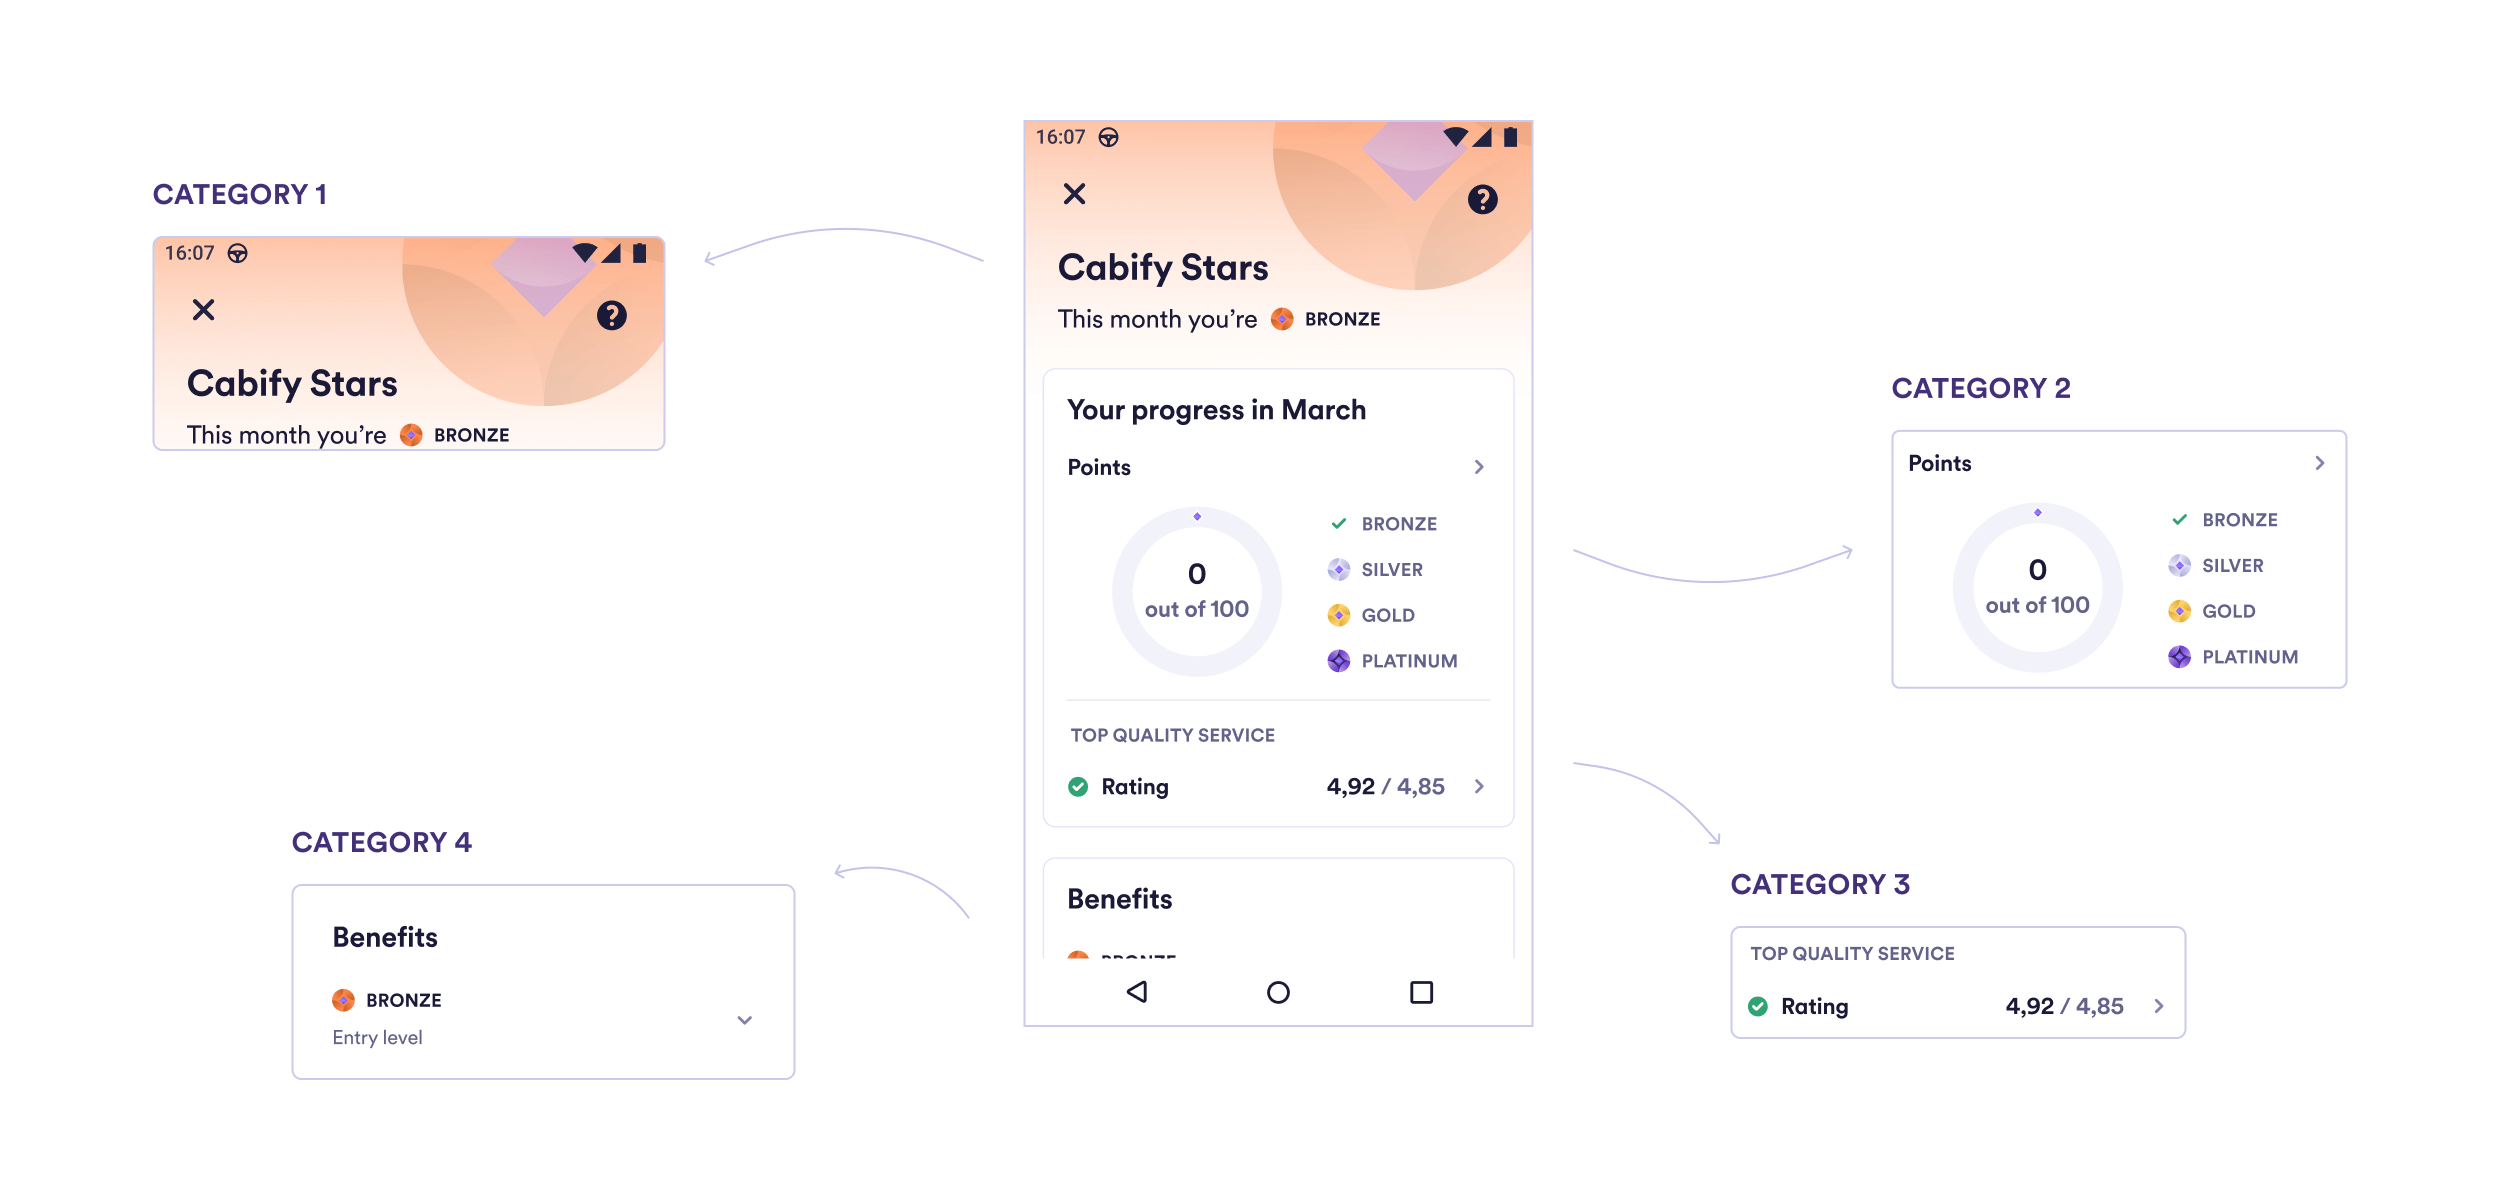 In the image we see the screenshot of the main screen of Cabify Stars, the loyalty program of the driver app. Coming out of the screenshot, we have 4 arrows. The first one leaves the head and is followed by the text "Category 1". The second comes from the second module of the screenshot, which indicates the driver's monthly progress with accumulated points, followed by the text "Category 2". The third comes out of the third module of the screenshot, referring to the driver's Rating, followed by the text "Category 3". And the last and fourth arrow comes out of the last visible module, referring to the benefits of the program, followed by the text "Category 4".